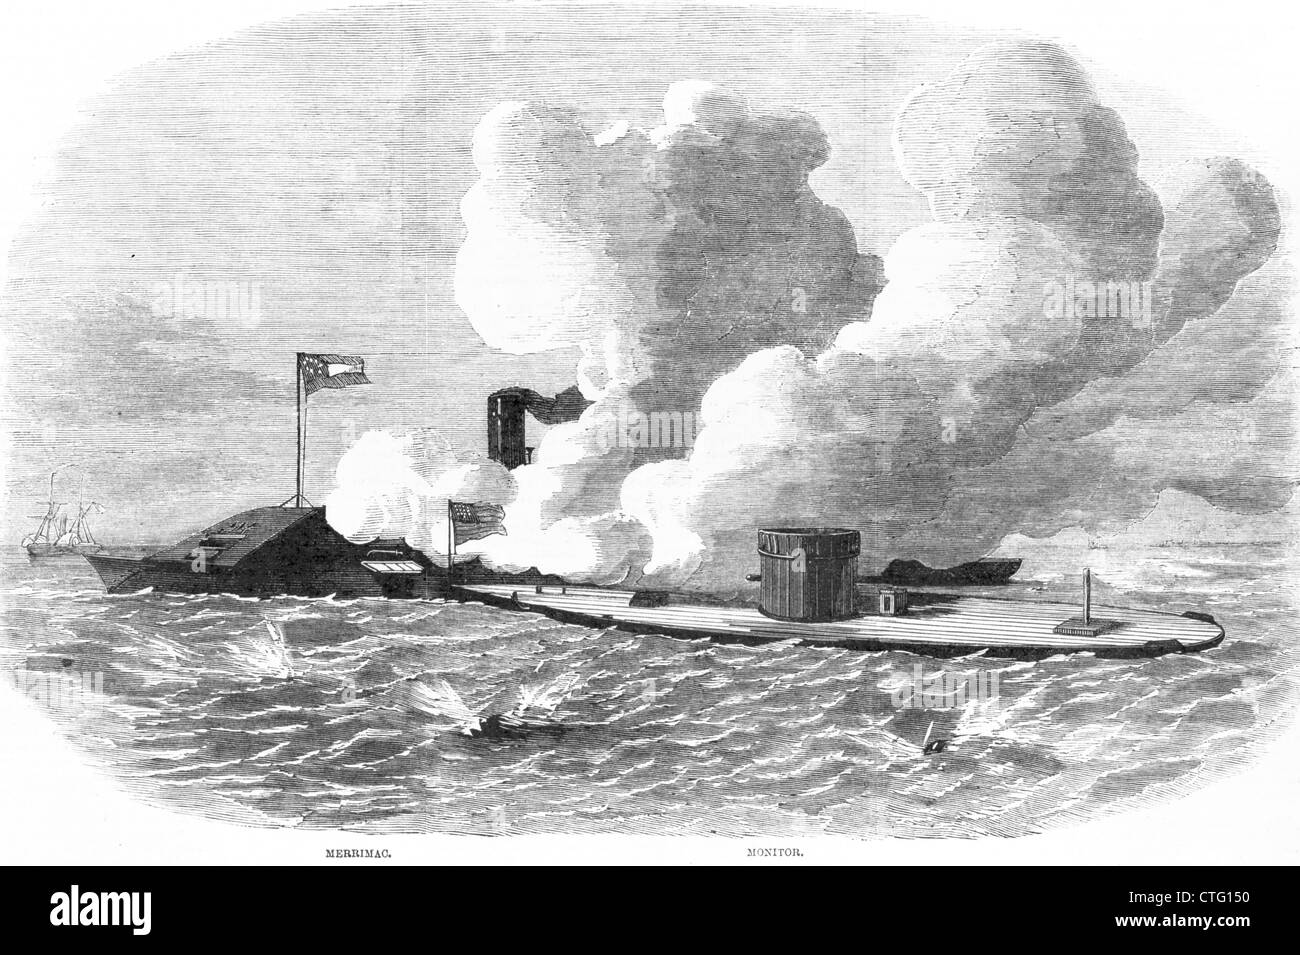 1860s MARCH 8,9 1862 BATTLE OF HAMPTON ROADS FIGHT BETWEEN FEDERAL MONITOR AND CONFEDERATE MERRIMAC FIRST IRONCLAD NAVAL BATTLE Stock Photo